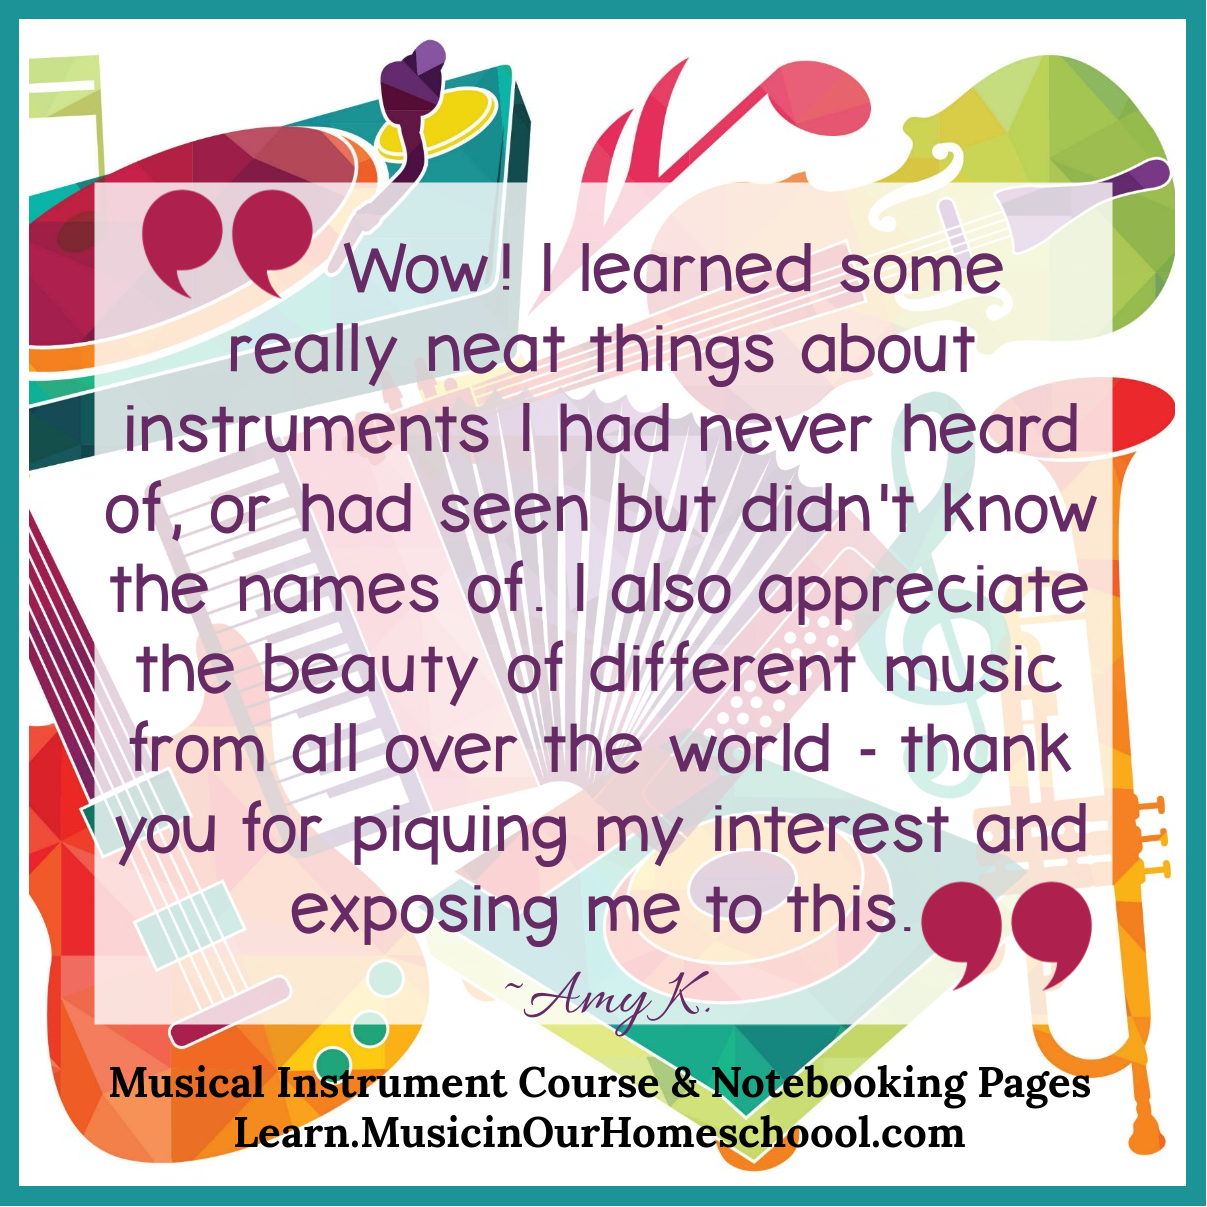 Musical Instrument Course & Notebooking Pages testimonial quote 